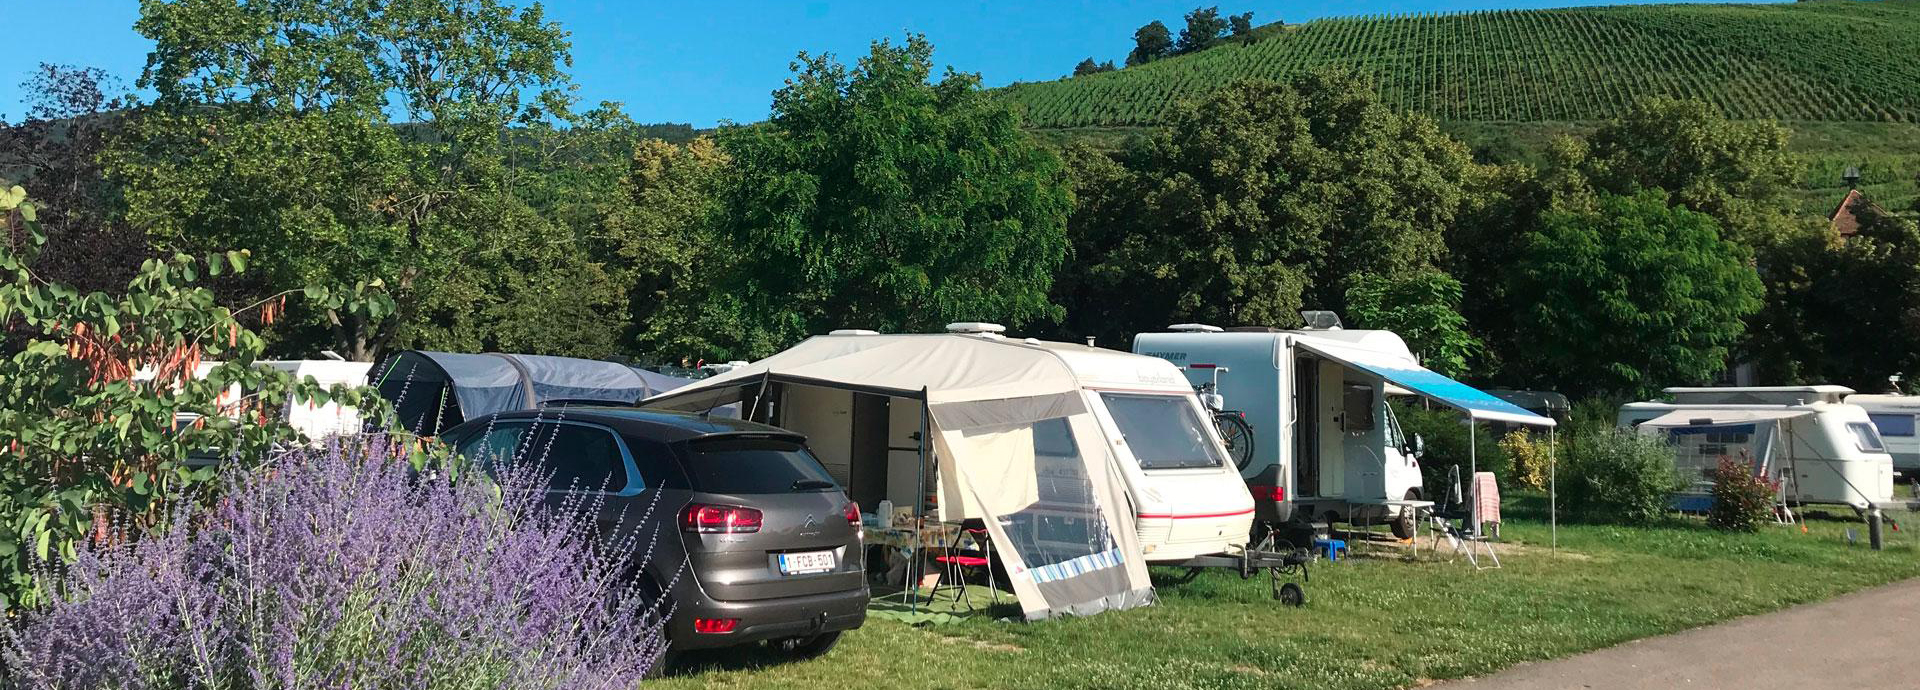 Camping le Médiéval tent pitches in Alsace